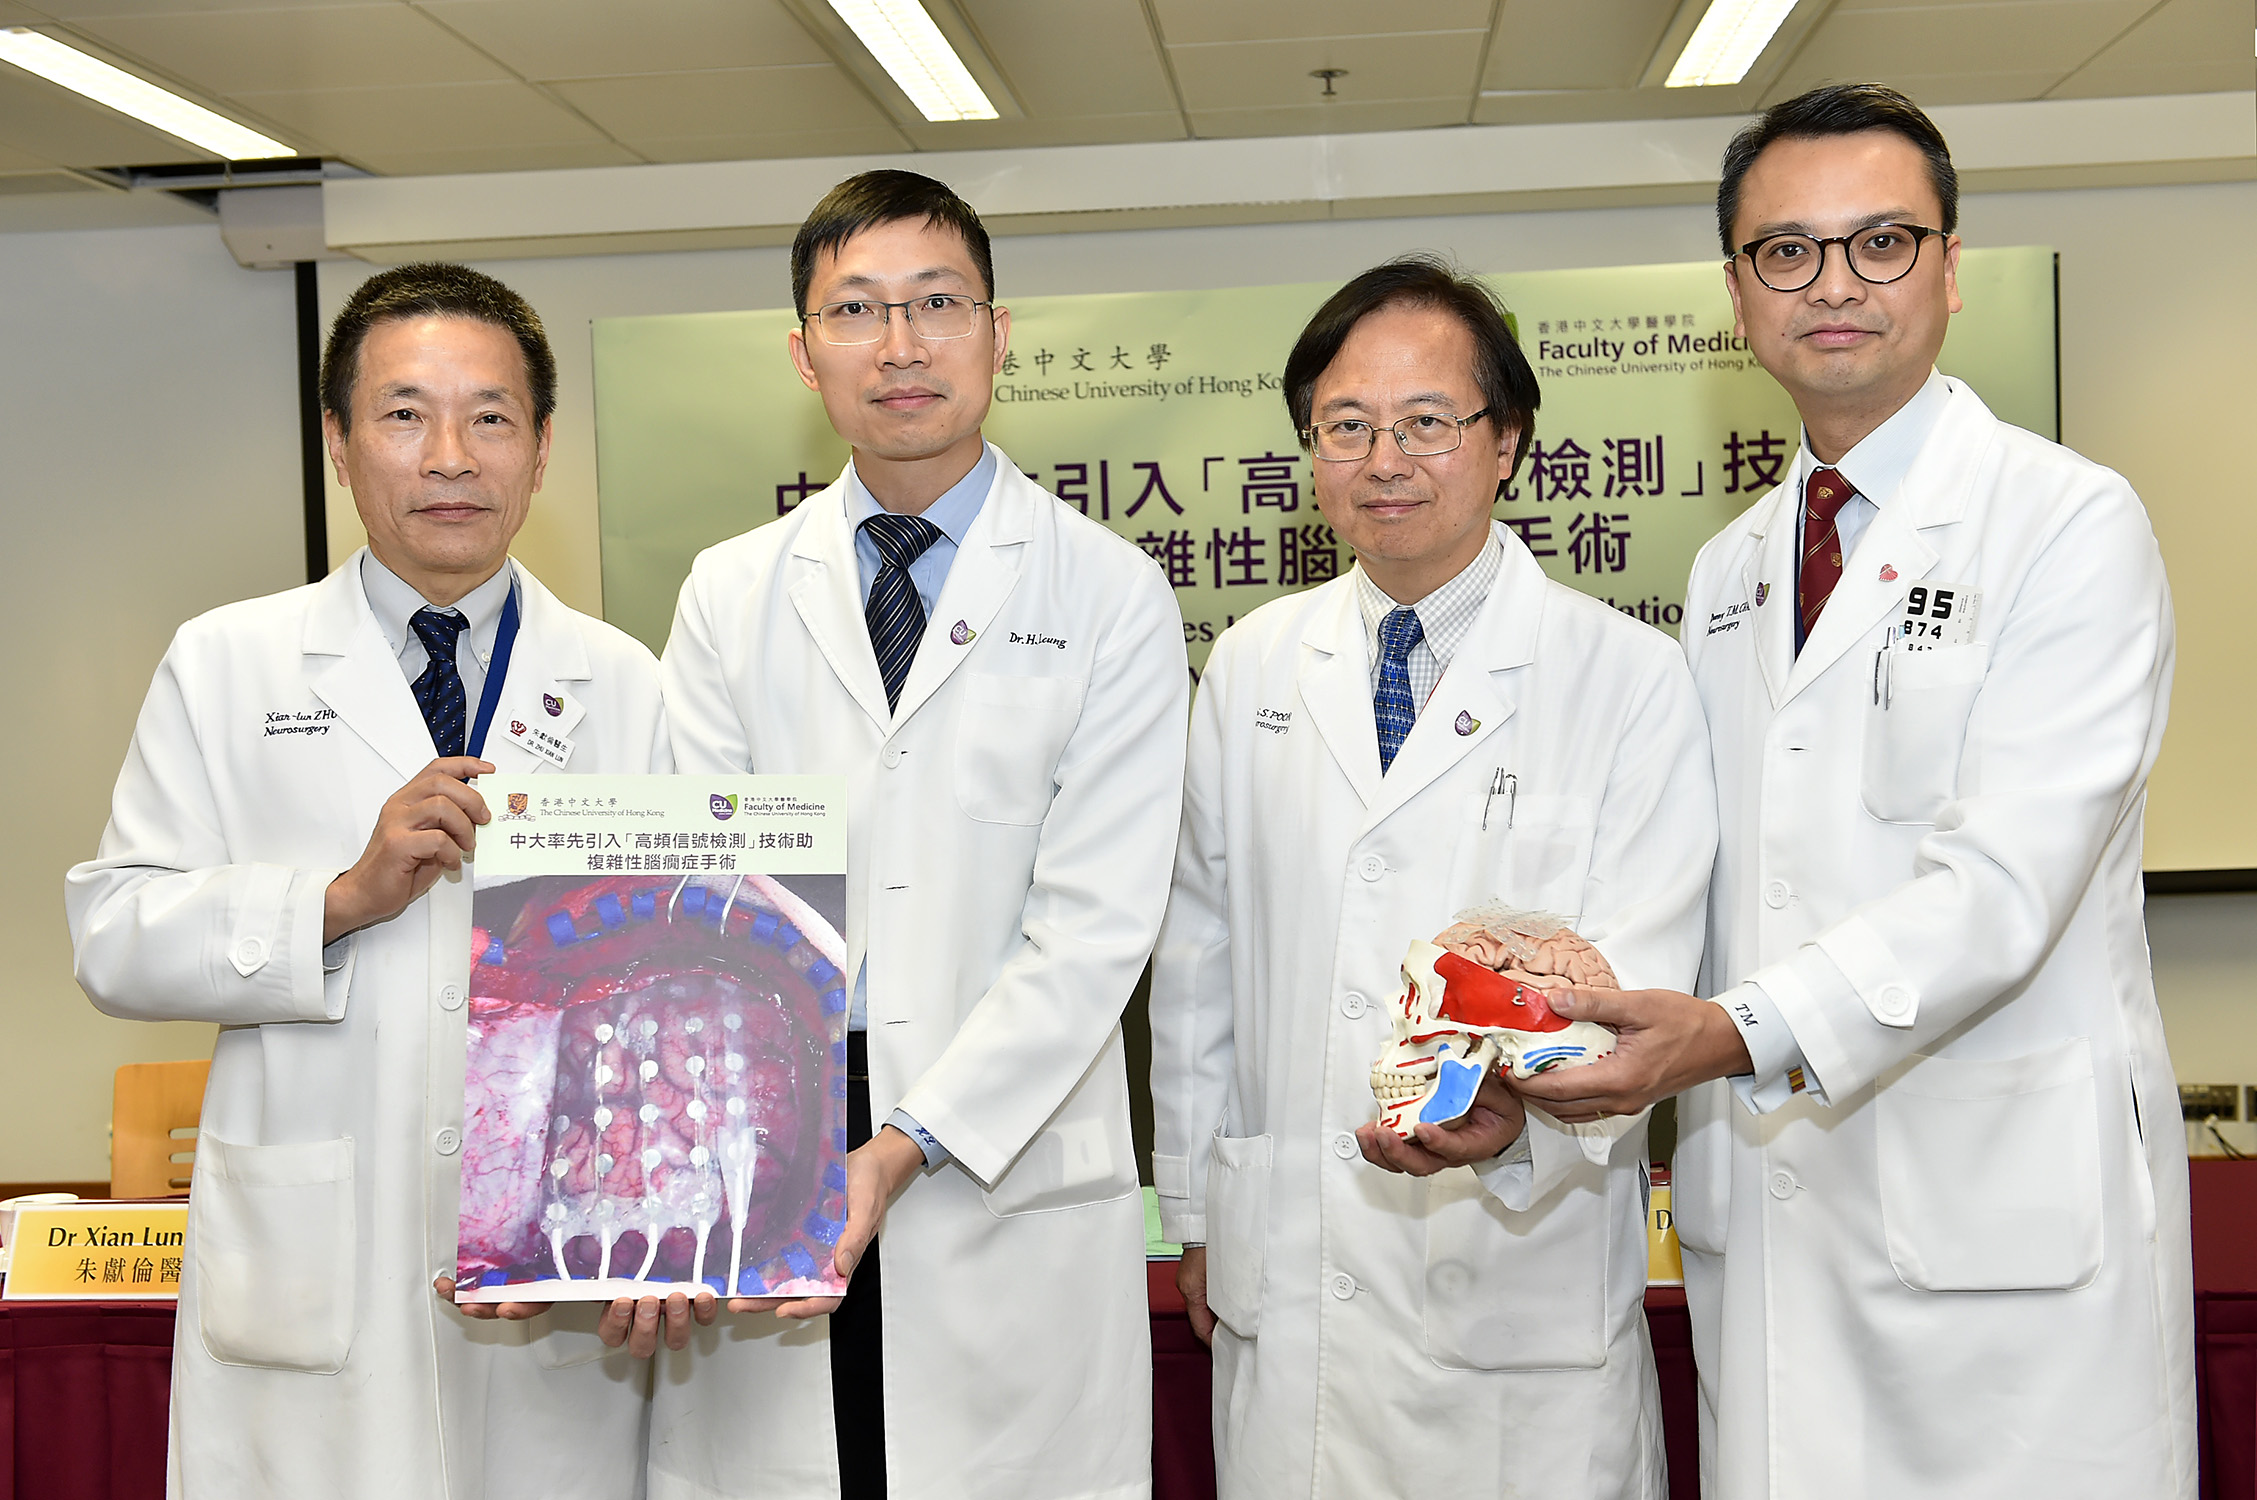 (From right) The CUHK medical team, including Dr. Chan Tat Ming, Clinical Associate Professor (honorary), Division of Neurosurgery, Department of Surgery; Prof. Poon Wai Sang, Head of Division of Neurosurgery, Department of Surgery; Dr. Leung Ho Wan, Clinical Associate Professor (honorary), Division of Neurology, Department of Medicine and Therapeutics; and Dr. Zhu Xian Lun, Clinical Associate Professor (honorary), Division of Neurosurgery, Department of Surgery, Faculty of Medicine, point out that the newly developed high frequency oscillations (HFOs) technology can accurately determine the focal origin of complex epilepsy cases, thereby increasing the surgical effectiveness by around 30%.